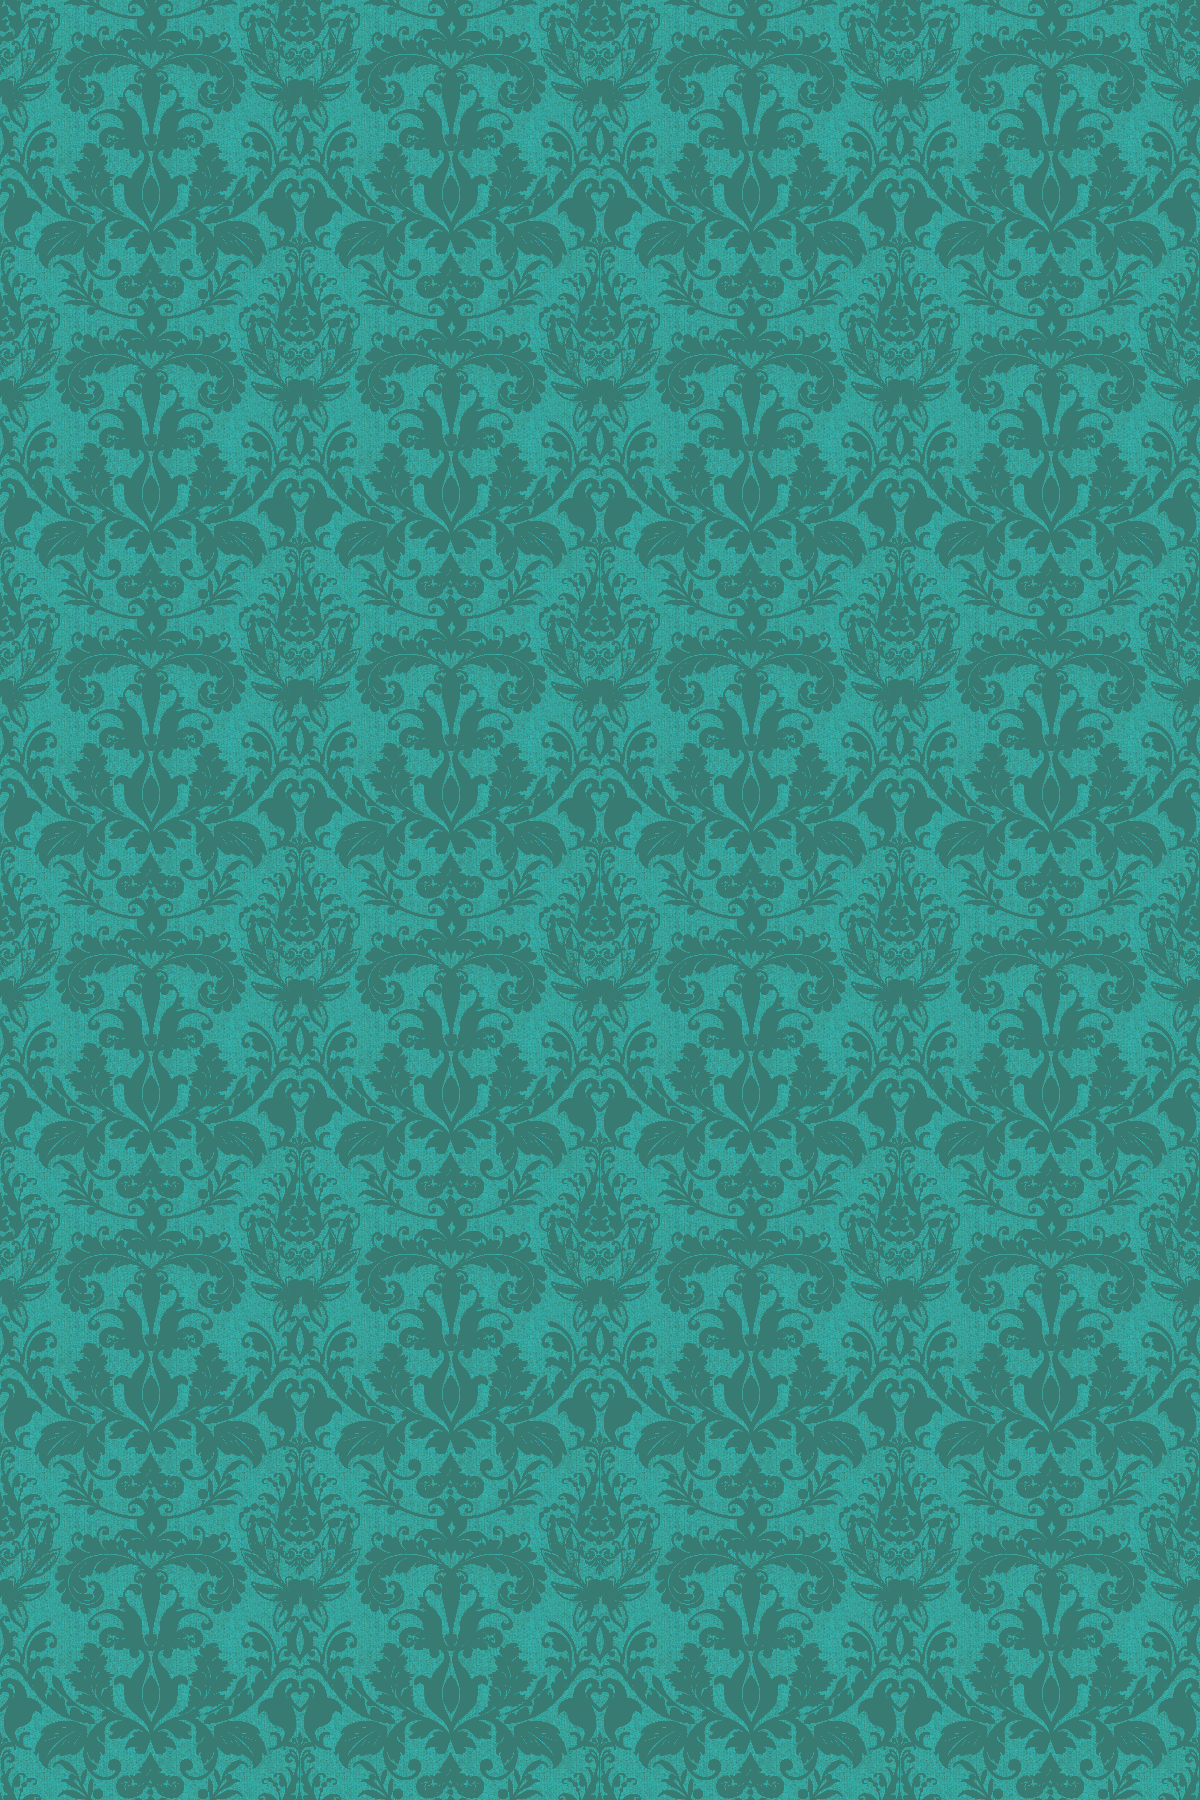 Teal Background By Bmouat